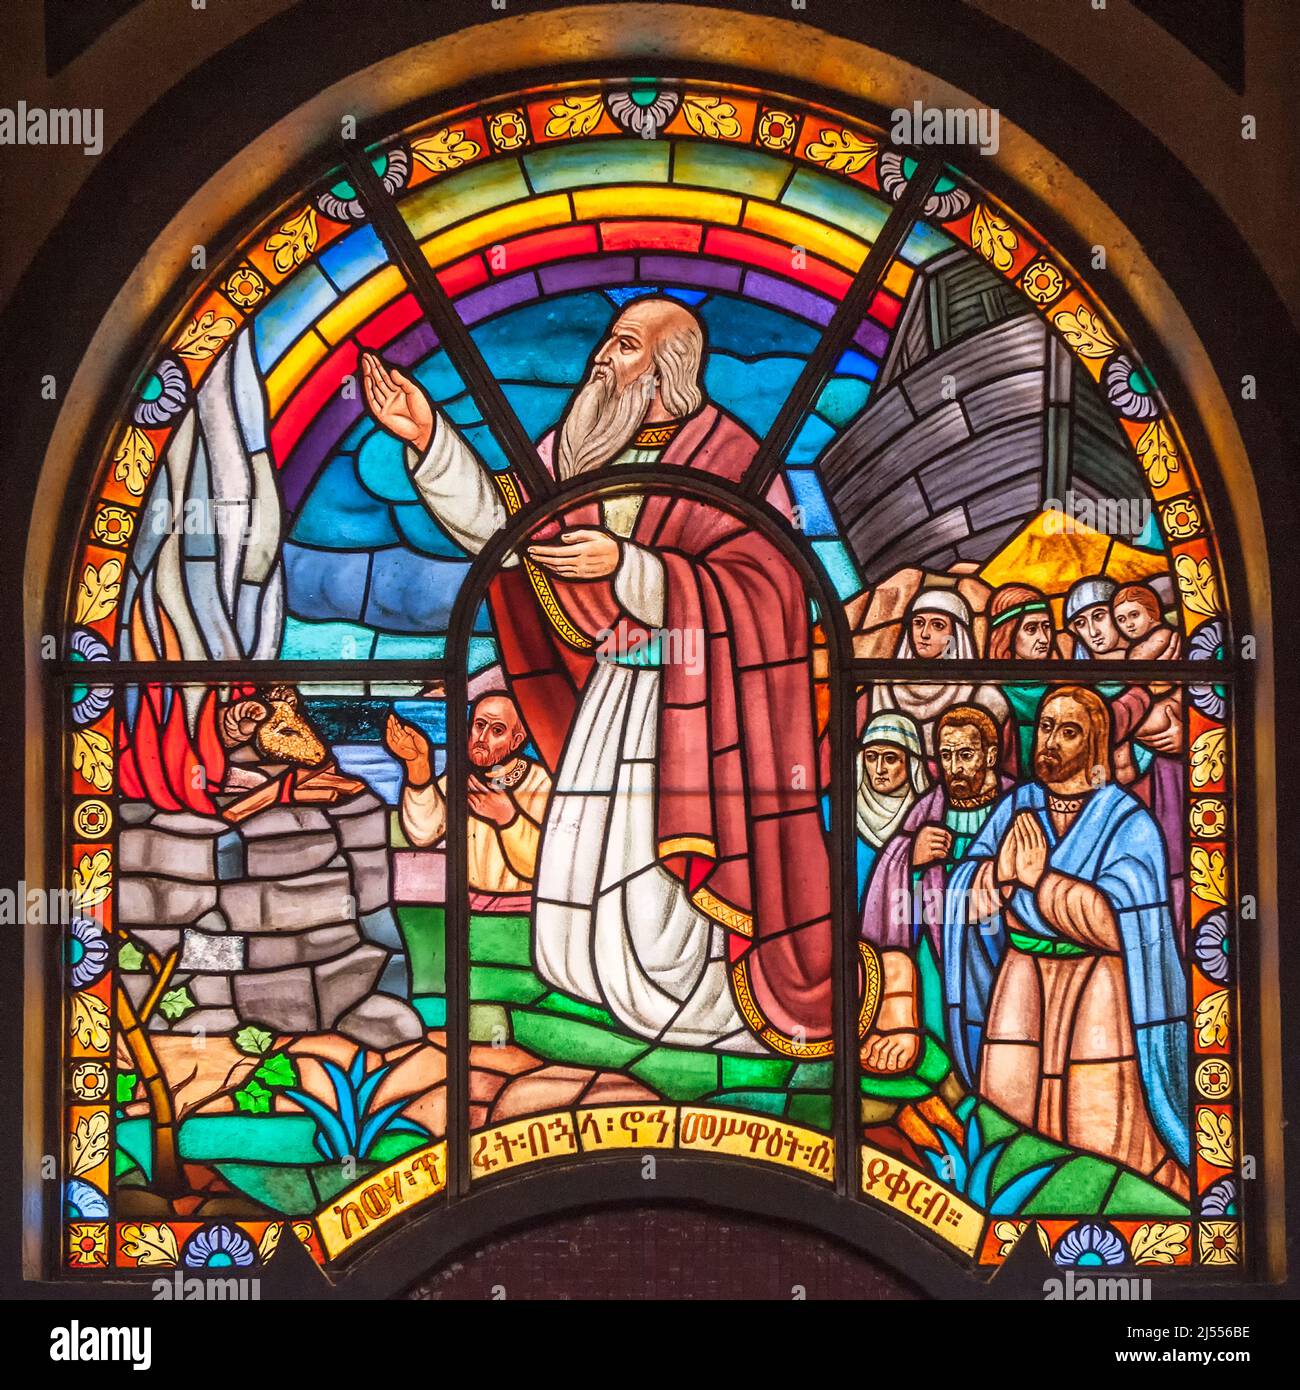 Holy Trinity Cathedral (Kiddist Selassie), Stained glass window, Addis Ababa, Ethiopia Stock Photo